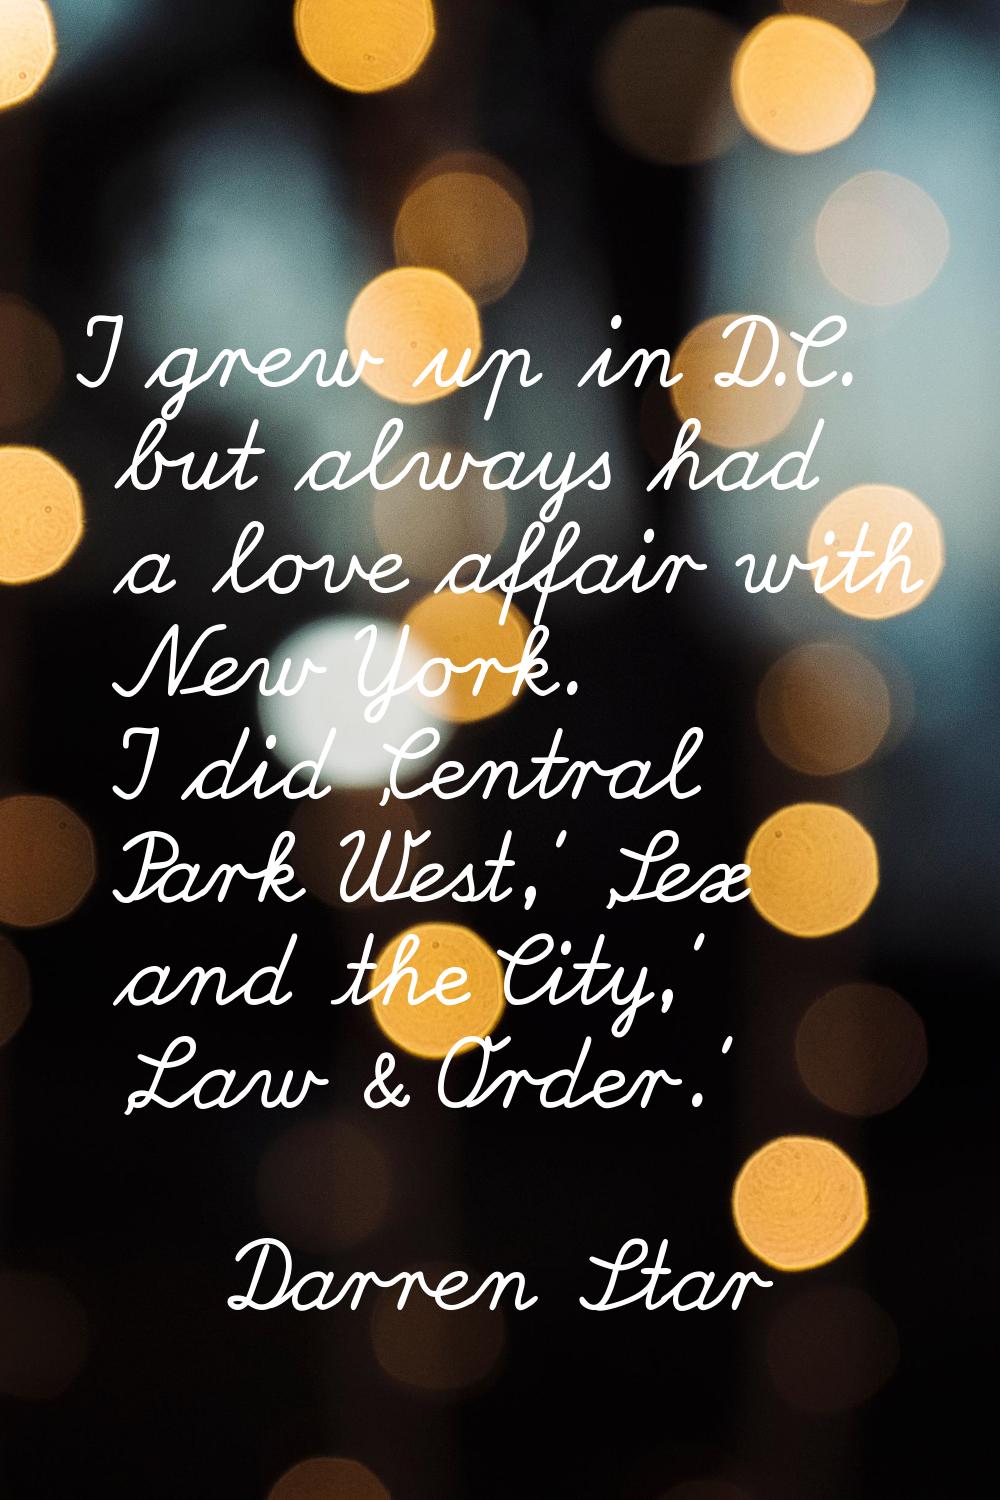 I grew up in D.C. but always had a love affair with New York. I did 'Central Park West,' 'Sex and t